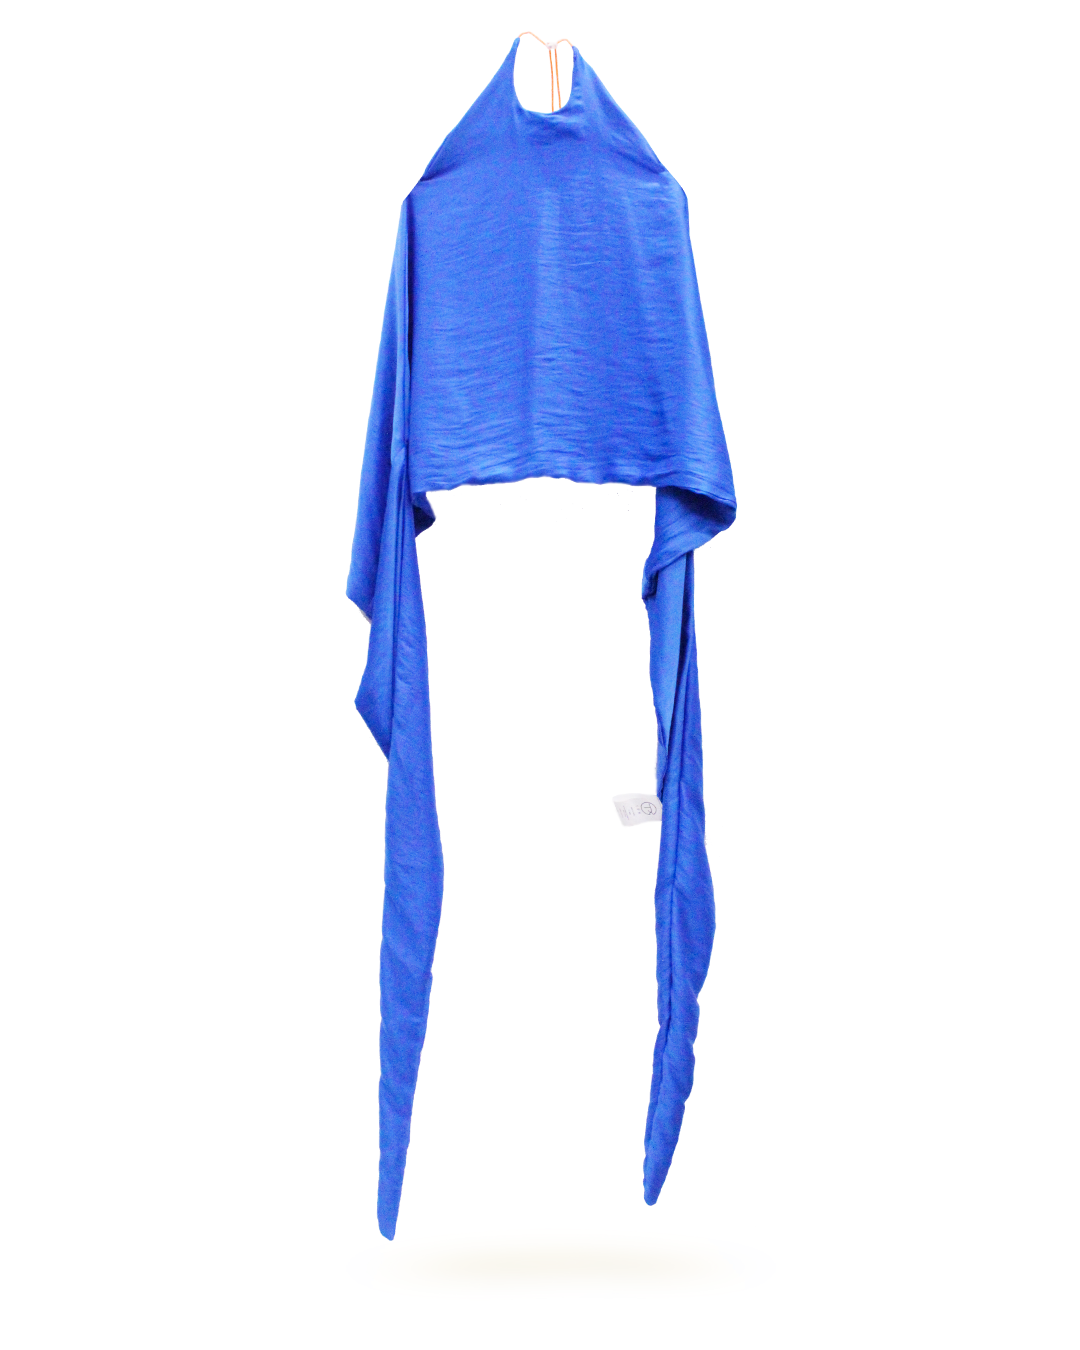 TOP TRIANGLE blue